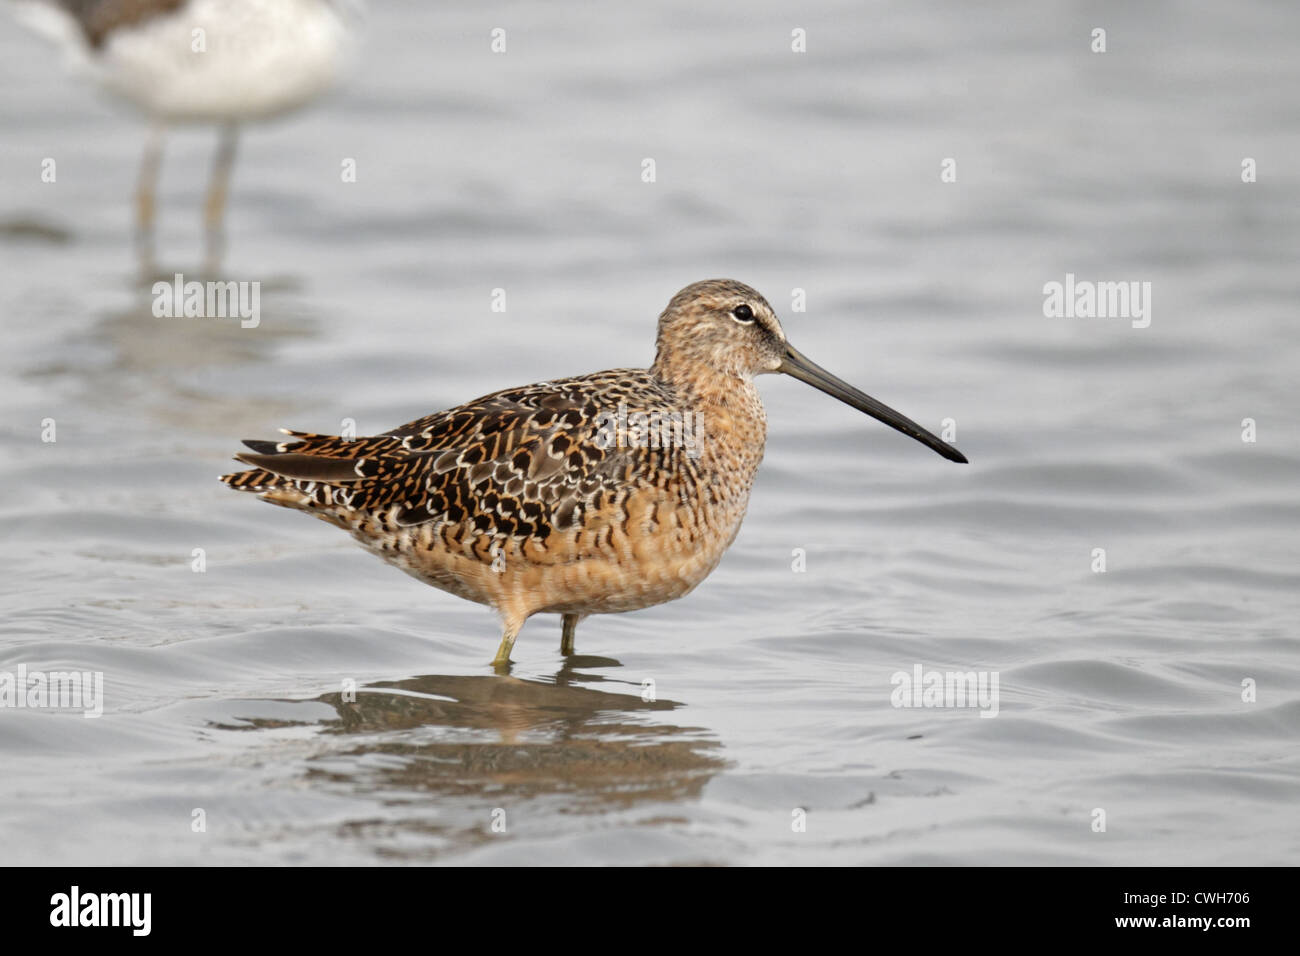 Long-billed Dowitcher, (Limnodromus scolopaceus), breeding adult in tidal waters, Mai Po Nature Reserve, Hong Kong April 2012 Stock Photo